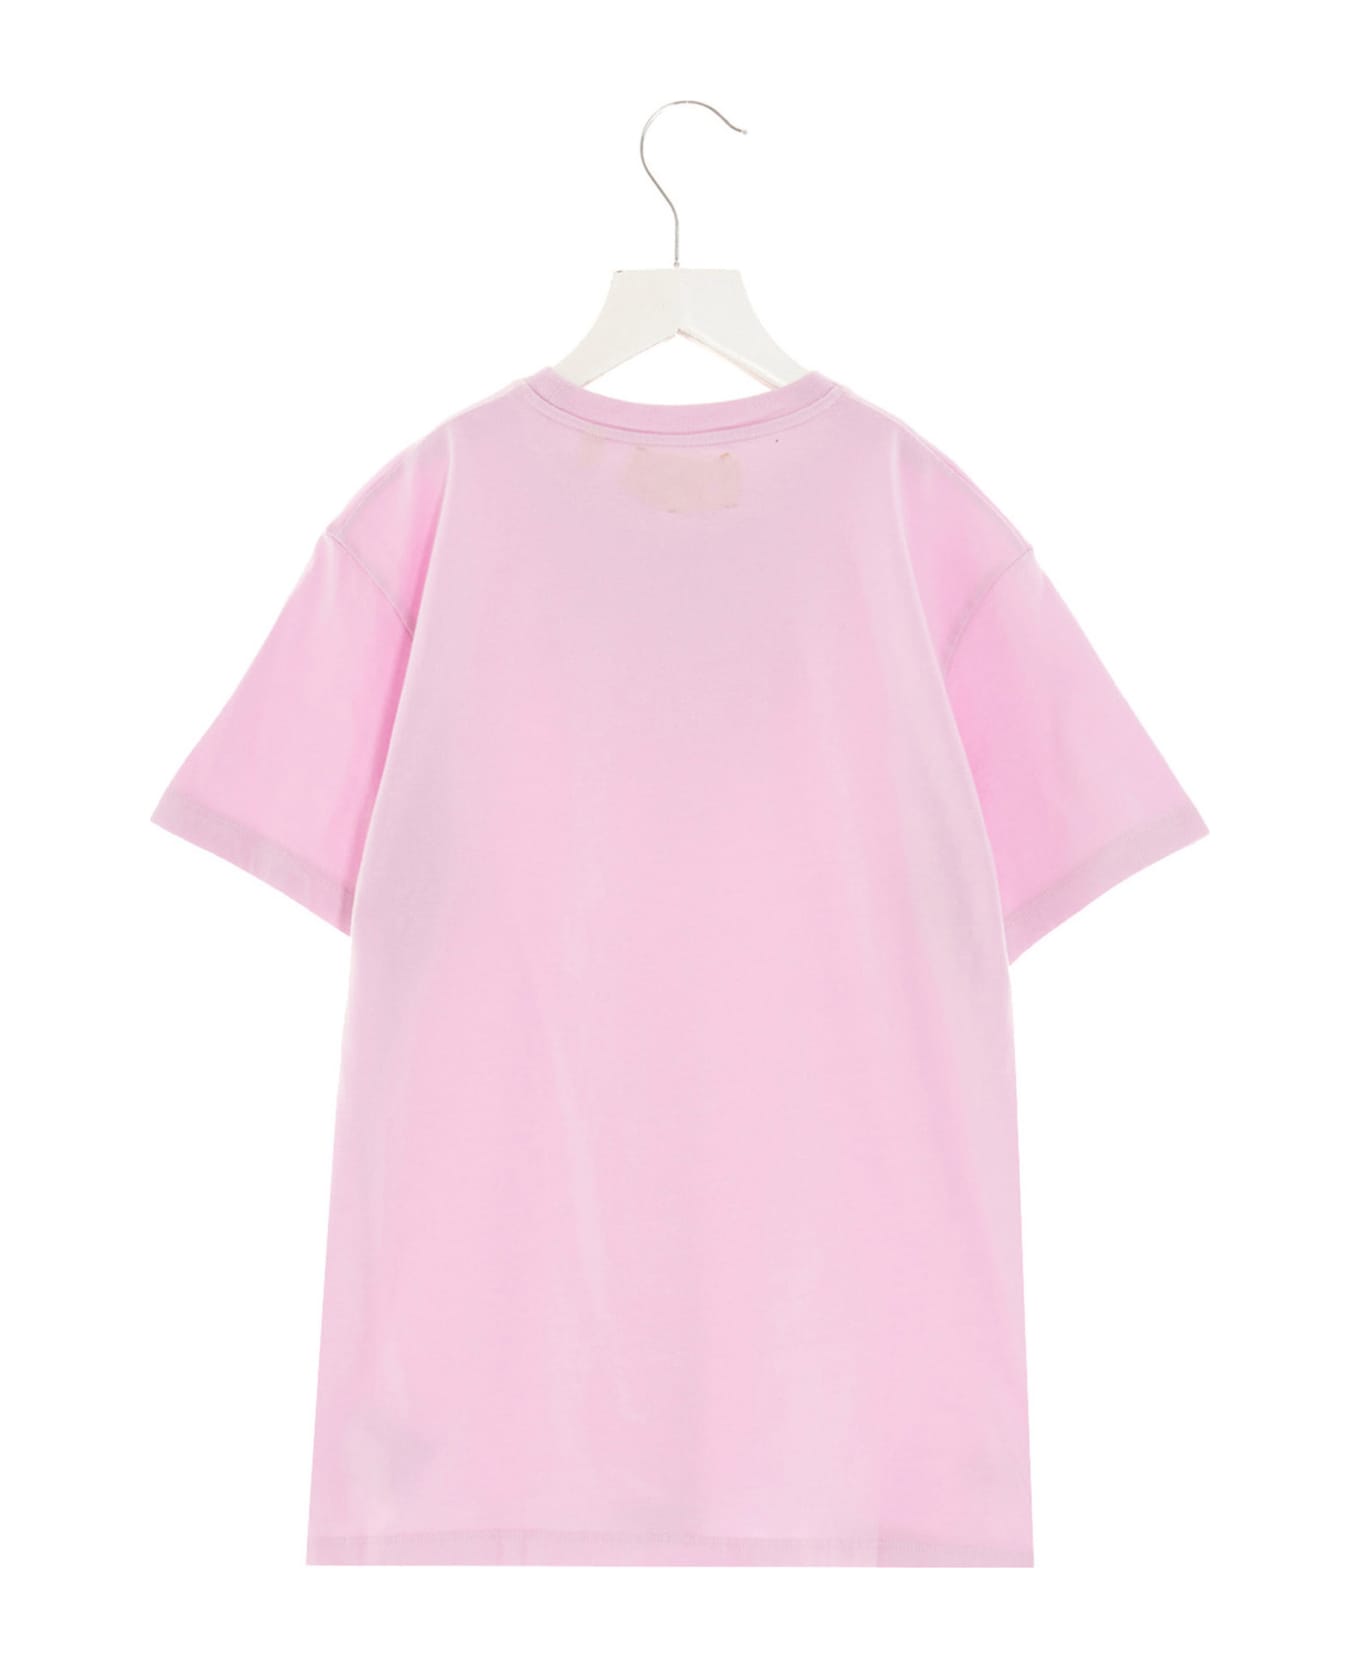 Off-White 'off' T-shirt - Pink